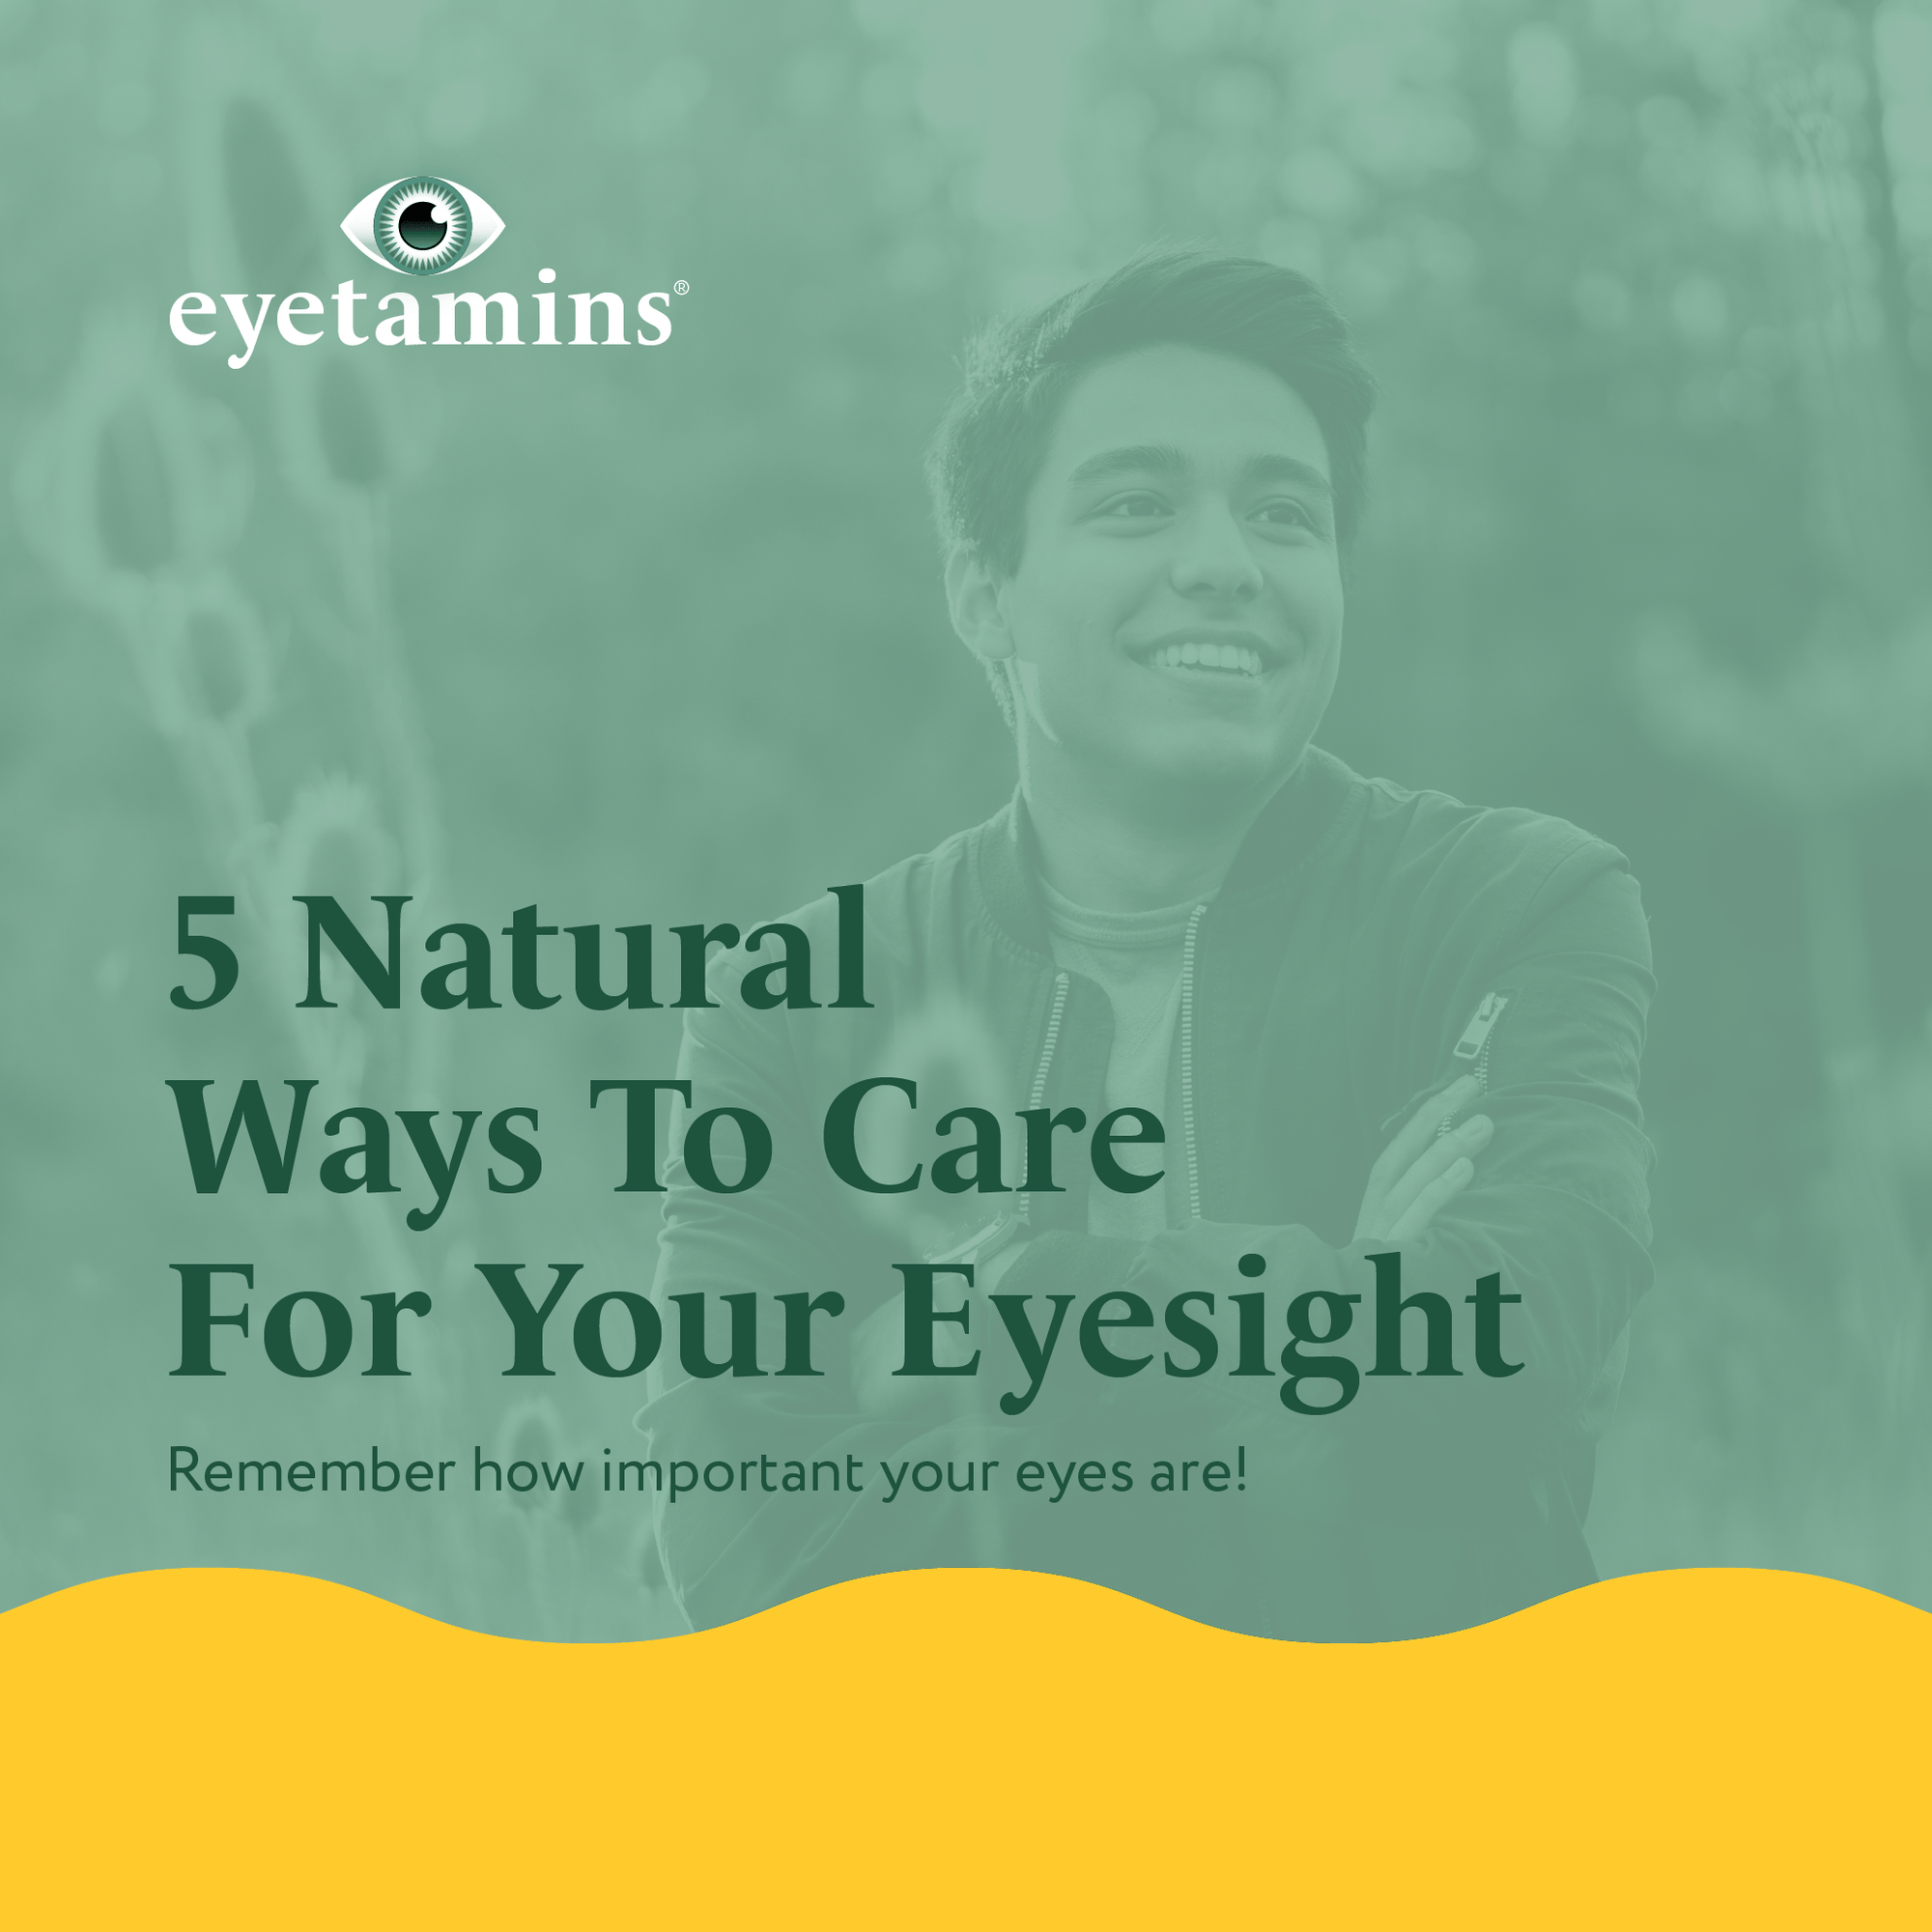 Eyetamins - 5 Natural Ways To Care For Your Eyesight